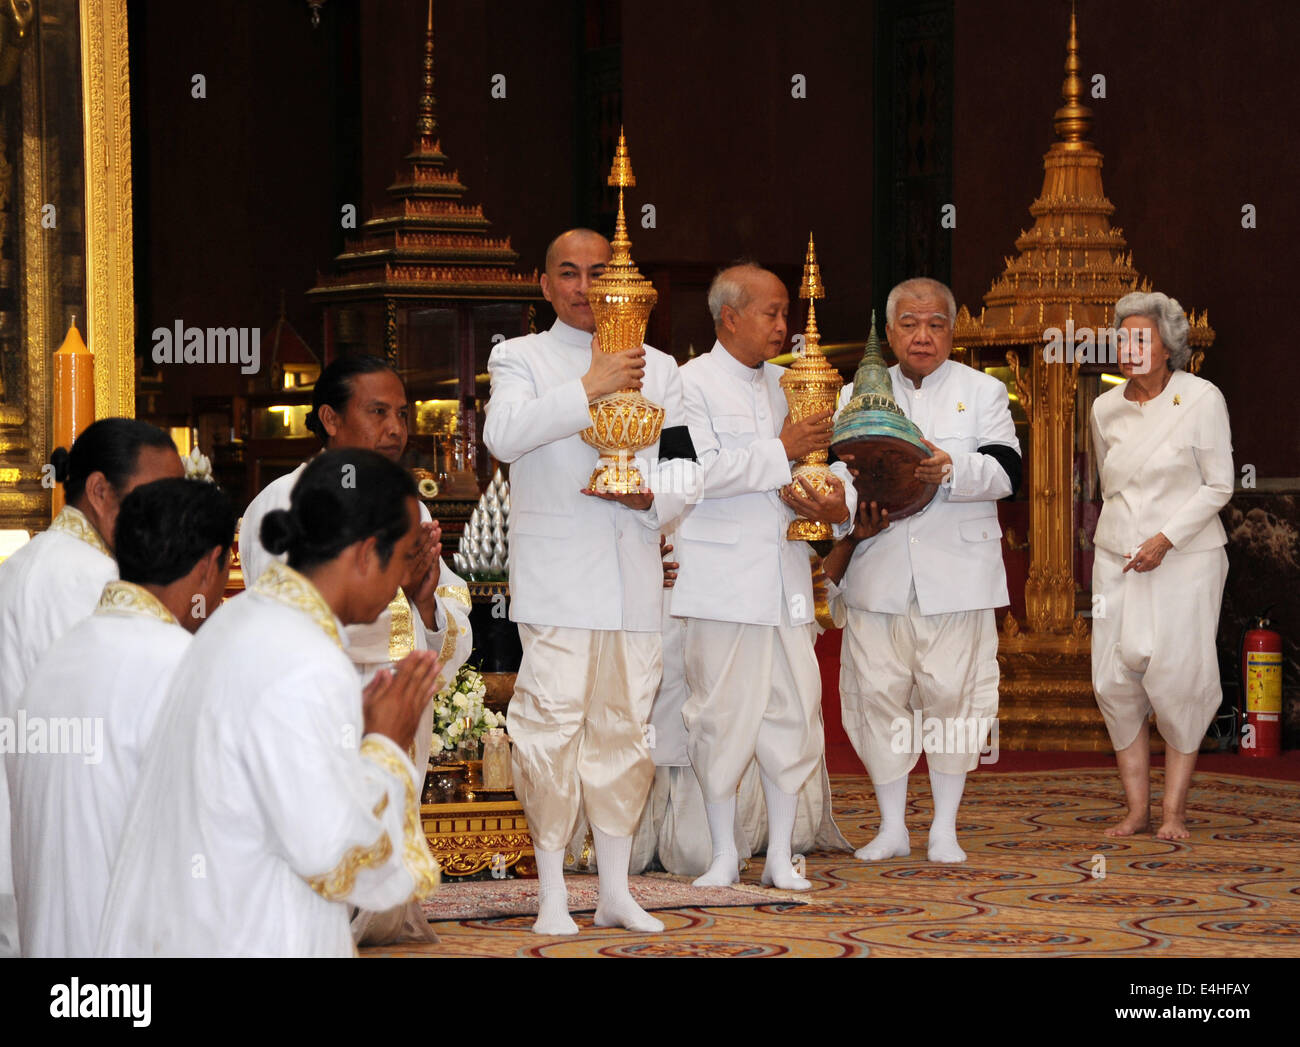 Phnom Penh, Cambodian King Norodom Sihanouk. 12th July, 2014. Cambodian King Norodom Sihamoni (4th R) holds one of the three urns containing the ashes of his father, late Cambodian King Norodom Sihanouk, at the Royal Palace in Phnom Penh July 12, 2014. The remains of Norodom Sihanouk was interred in a stupa in the Royal Palace's Silver Pagoda on Saturday. Credit:  Sovannara/Xinhua/Alamy Live News Stock Photo